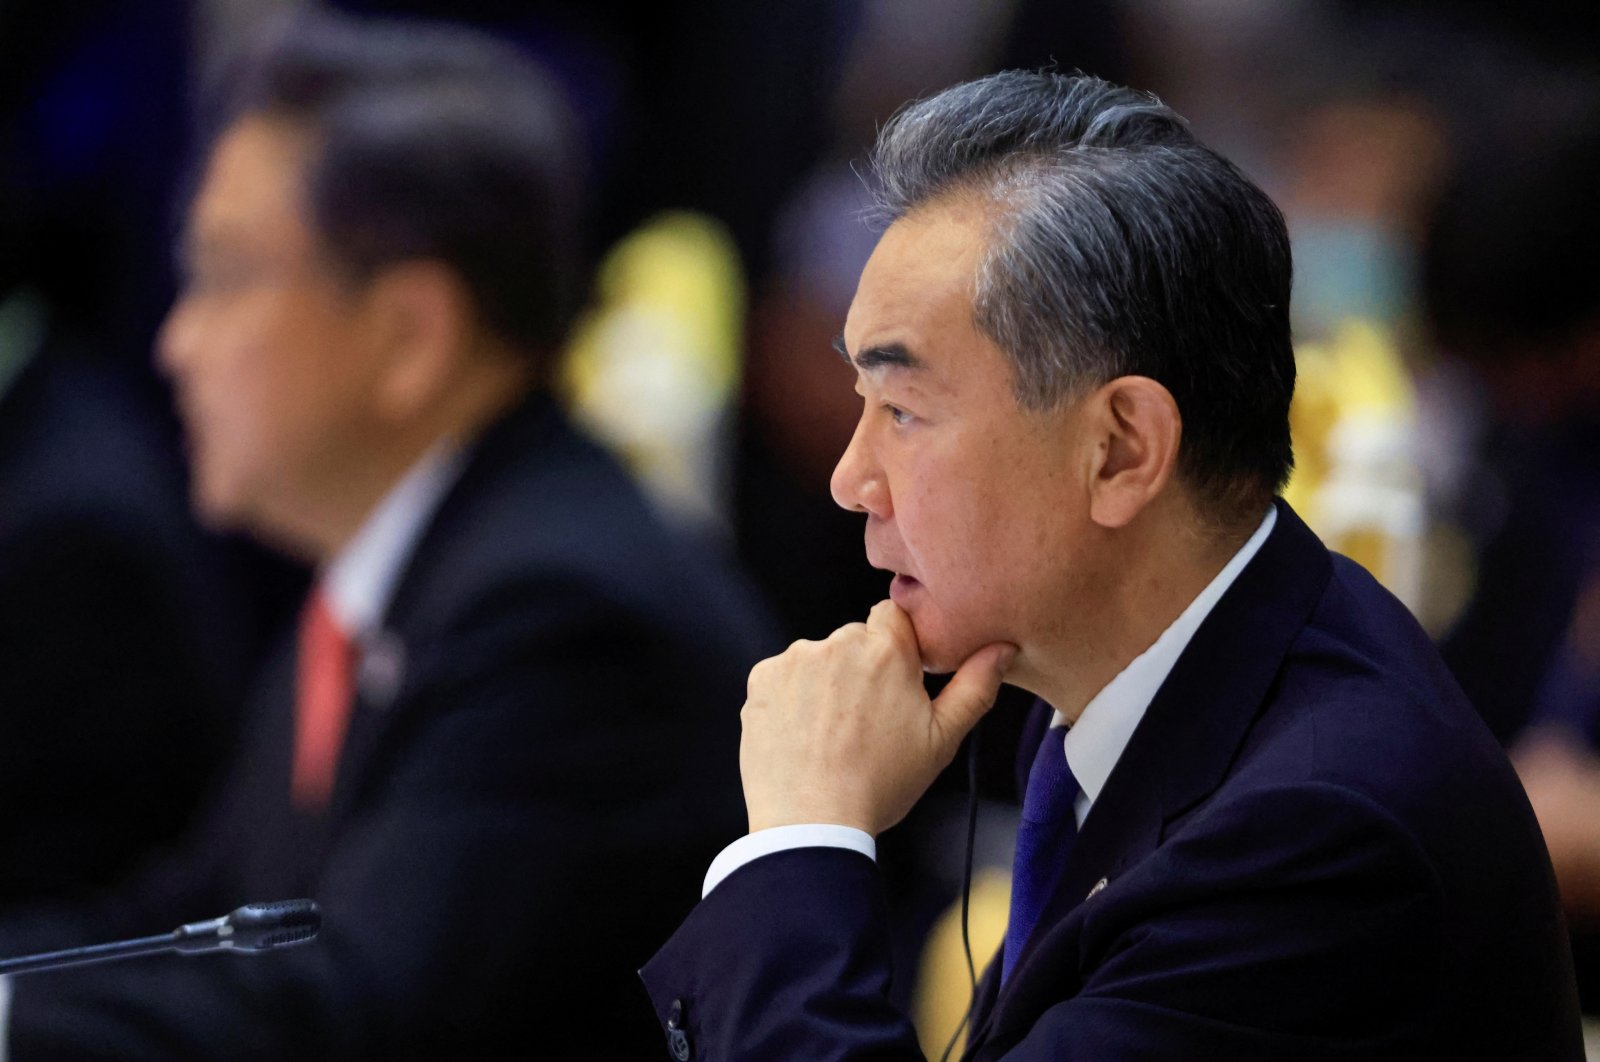 Chinese Foreign Minister Wang Yi attend the ASEAN Plus Three Foreign Ministers’ Meeting in in Phnom Penh, Cambodia, Aug. 4, 2022. (Reuters Photo)